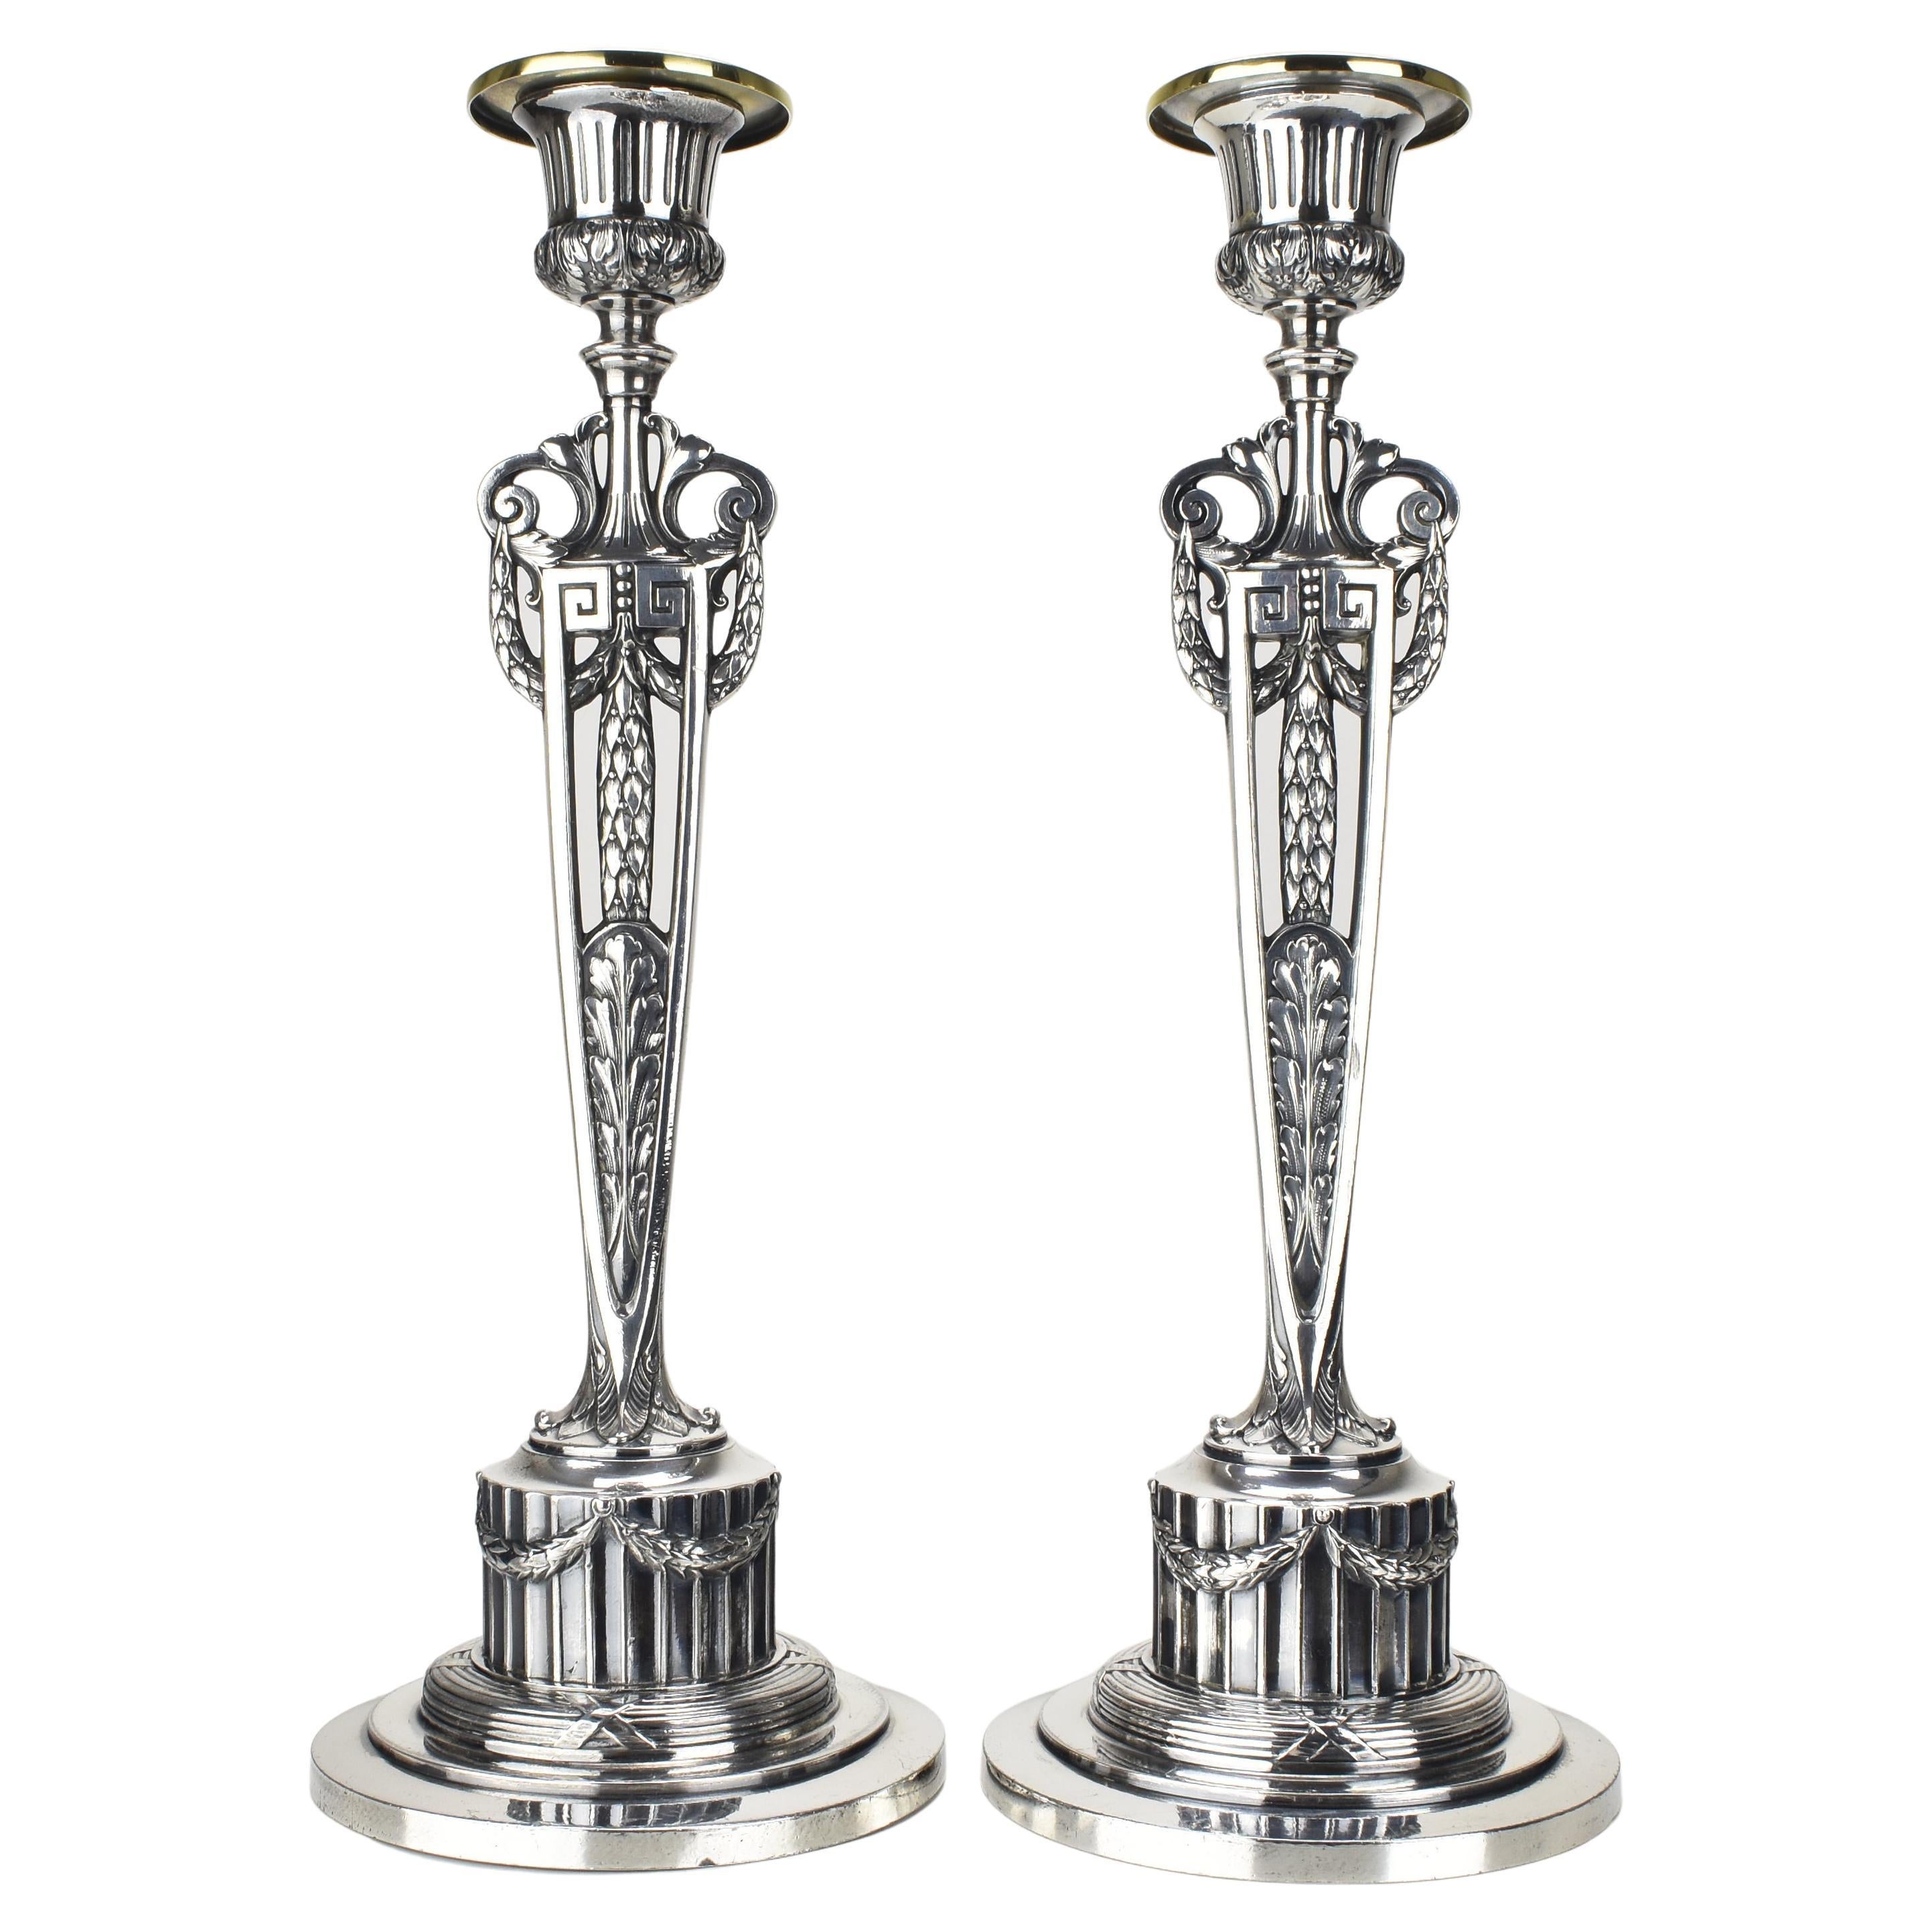 Antique Candlesticks Empire Pattern by WMF Art Nouveau Silverplated For Sale